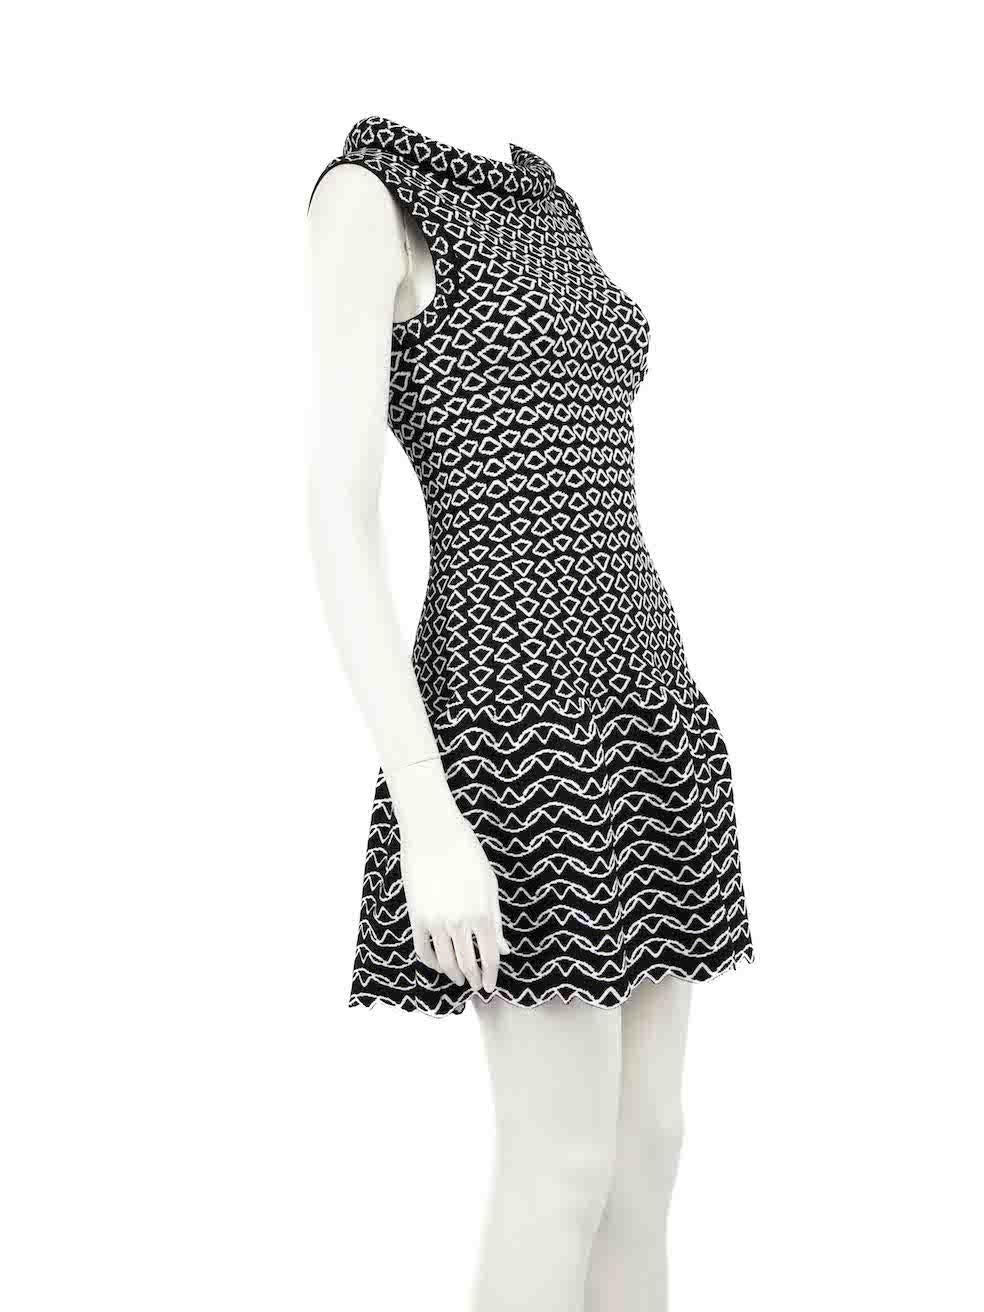 CONDITION is Never worn, with tags. No visible wear to dress is evident on this new Alaïa designer resale item.
 
 
 
 Details
 
 
 Black
 
 Viscose
 
 Knit dress
 
 Abstract pattern
 
 Padded neckline
 
 Side zip fastening
 
 
 
 
 
 Made in Italy
